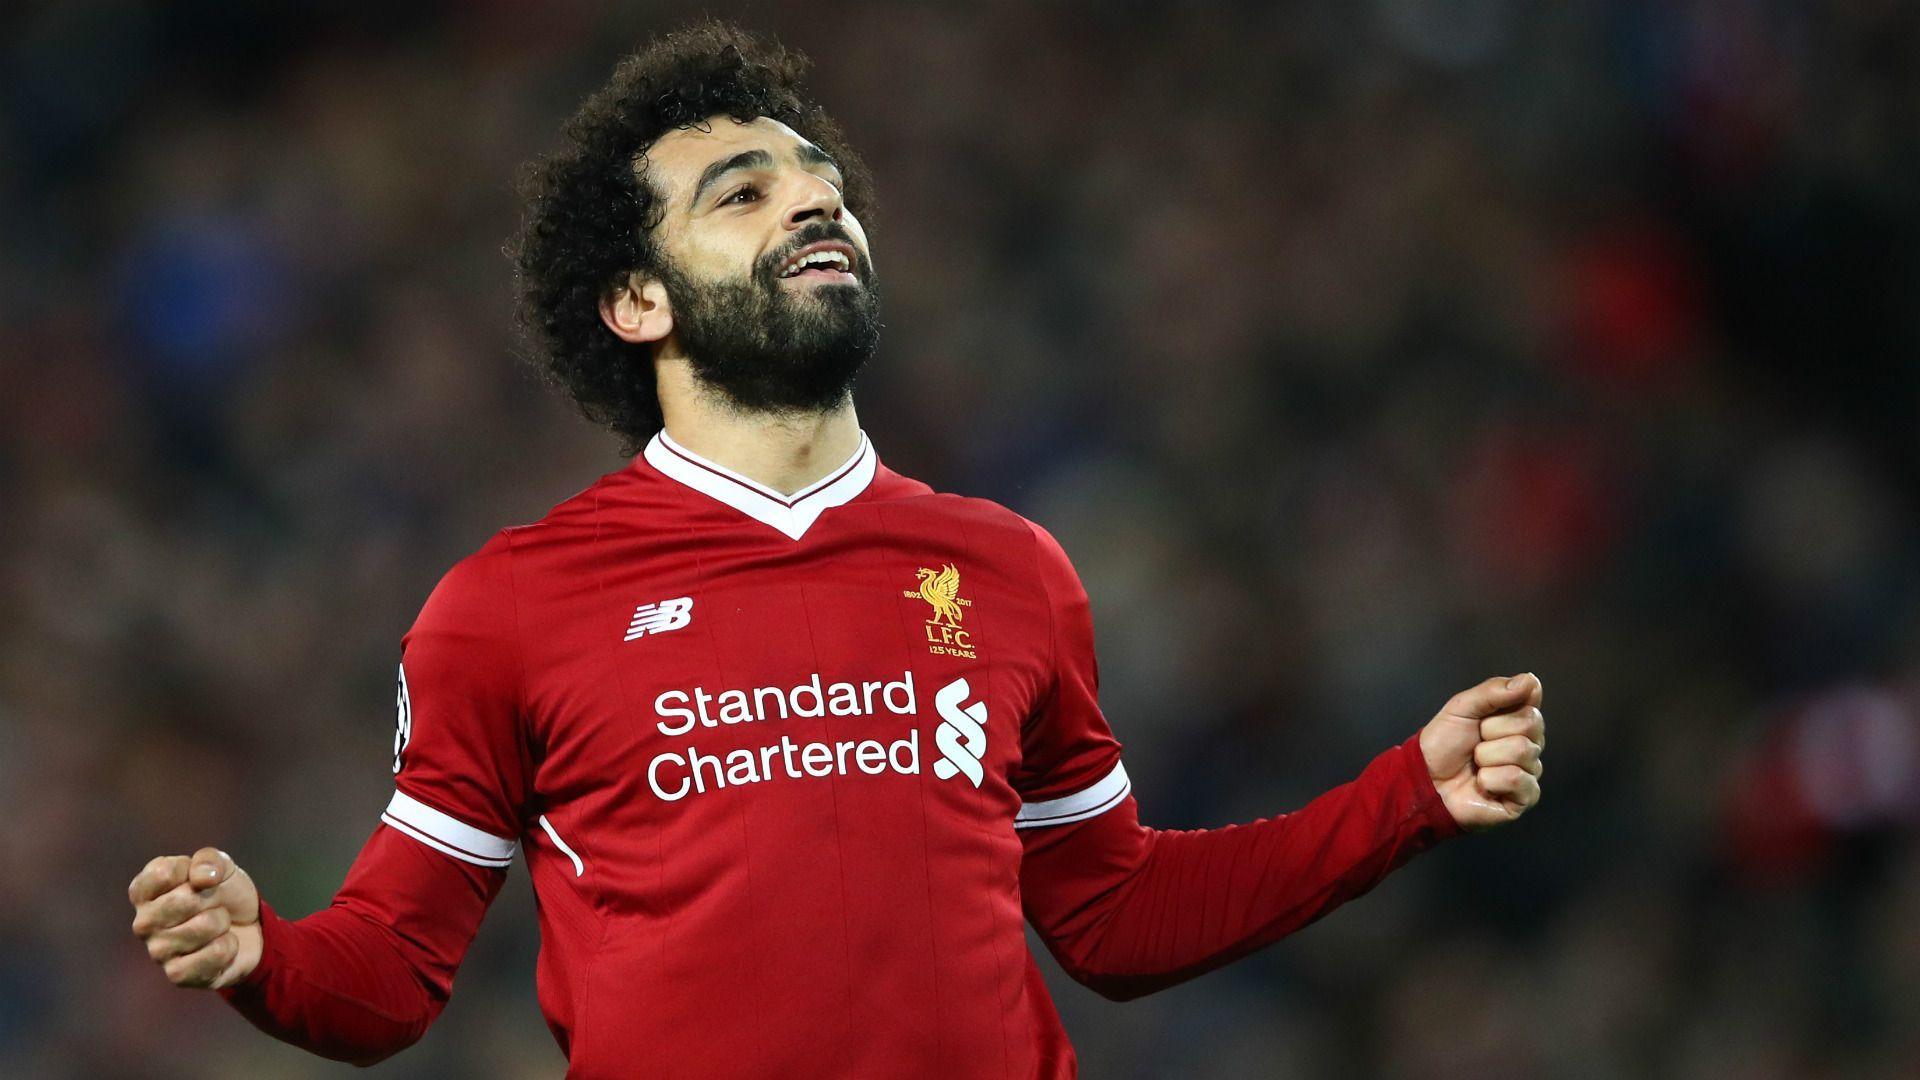 Mohamed Salah on the path to becoming one of Africa's greats